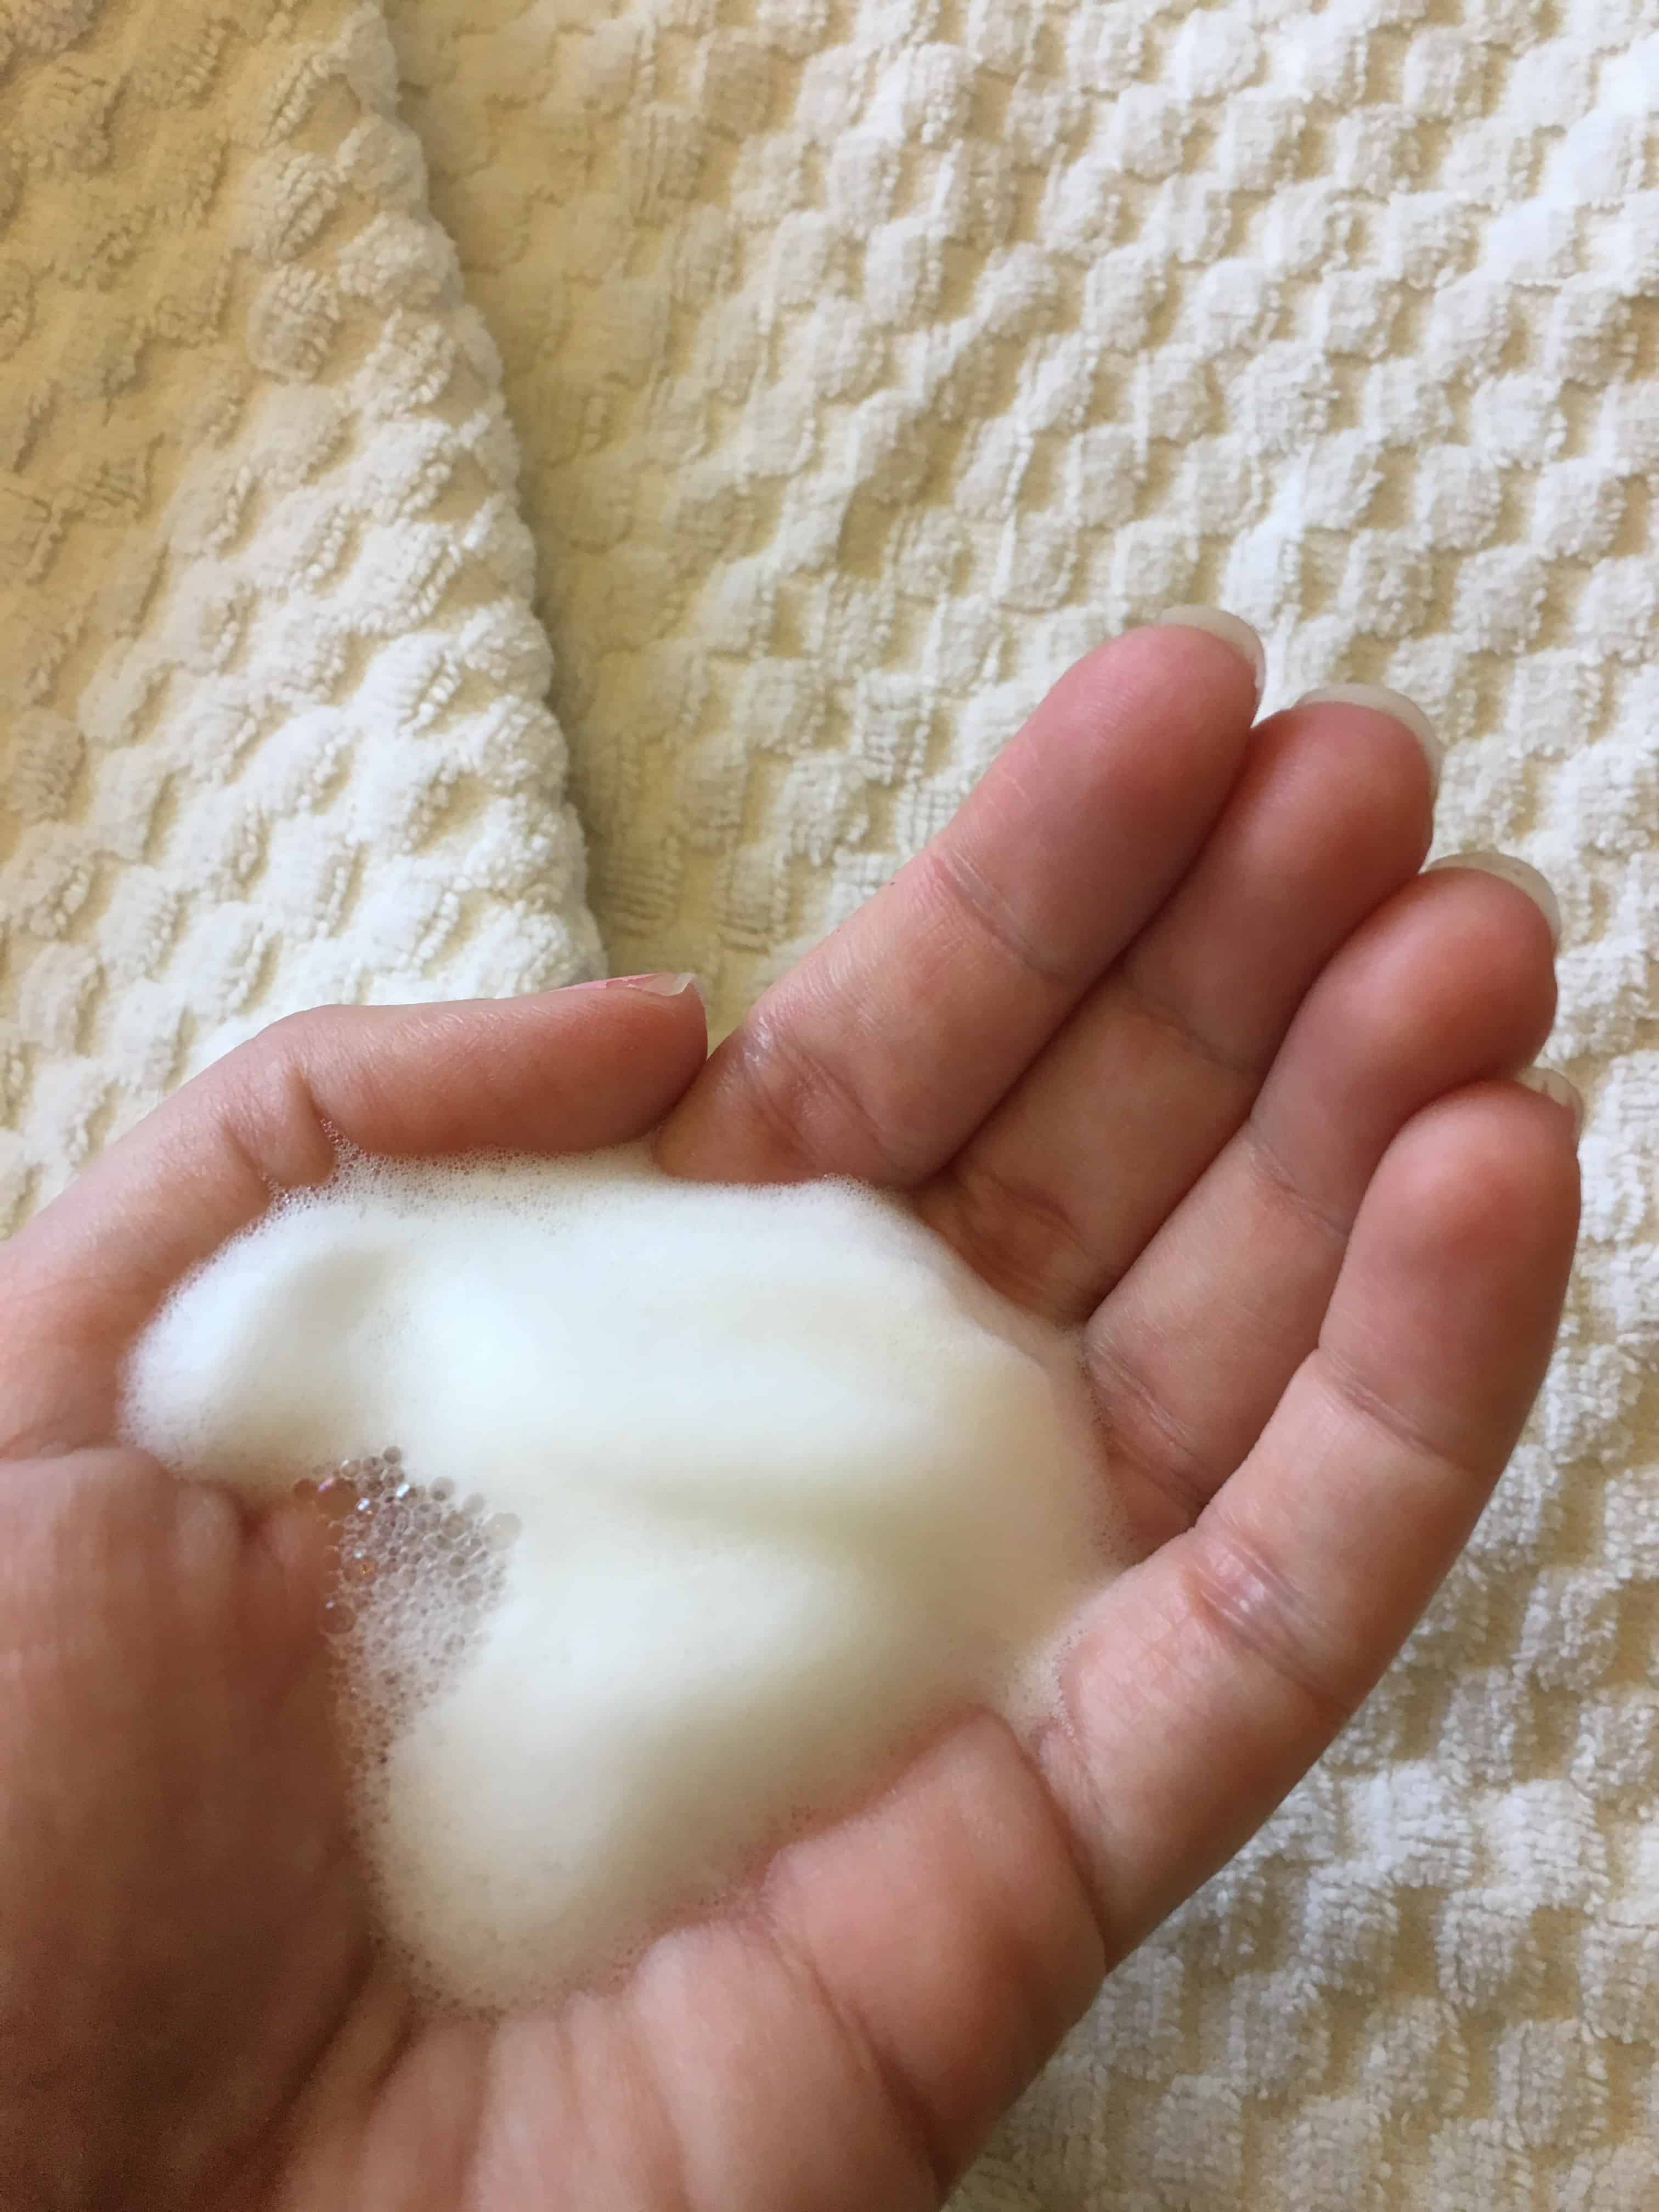 If you want to learn an natural, easy, inexpensive method for how to make DIY foaming hand soap, look no further! This recipe couldn't be easier.